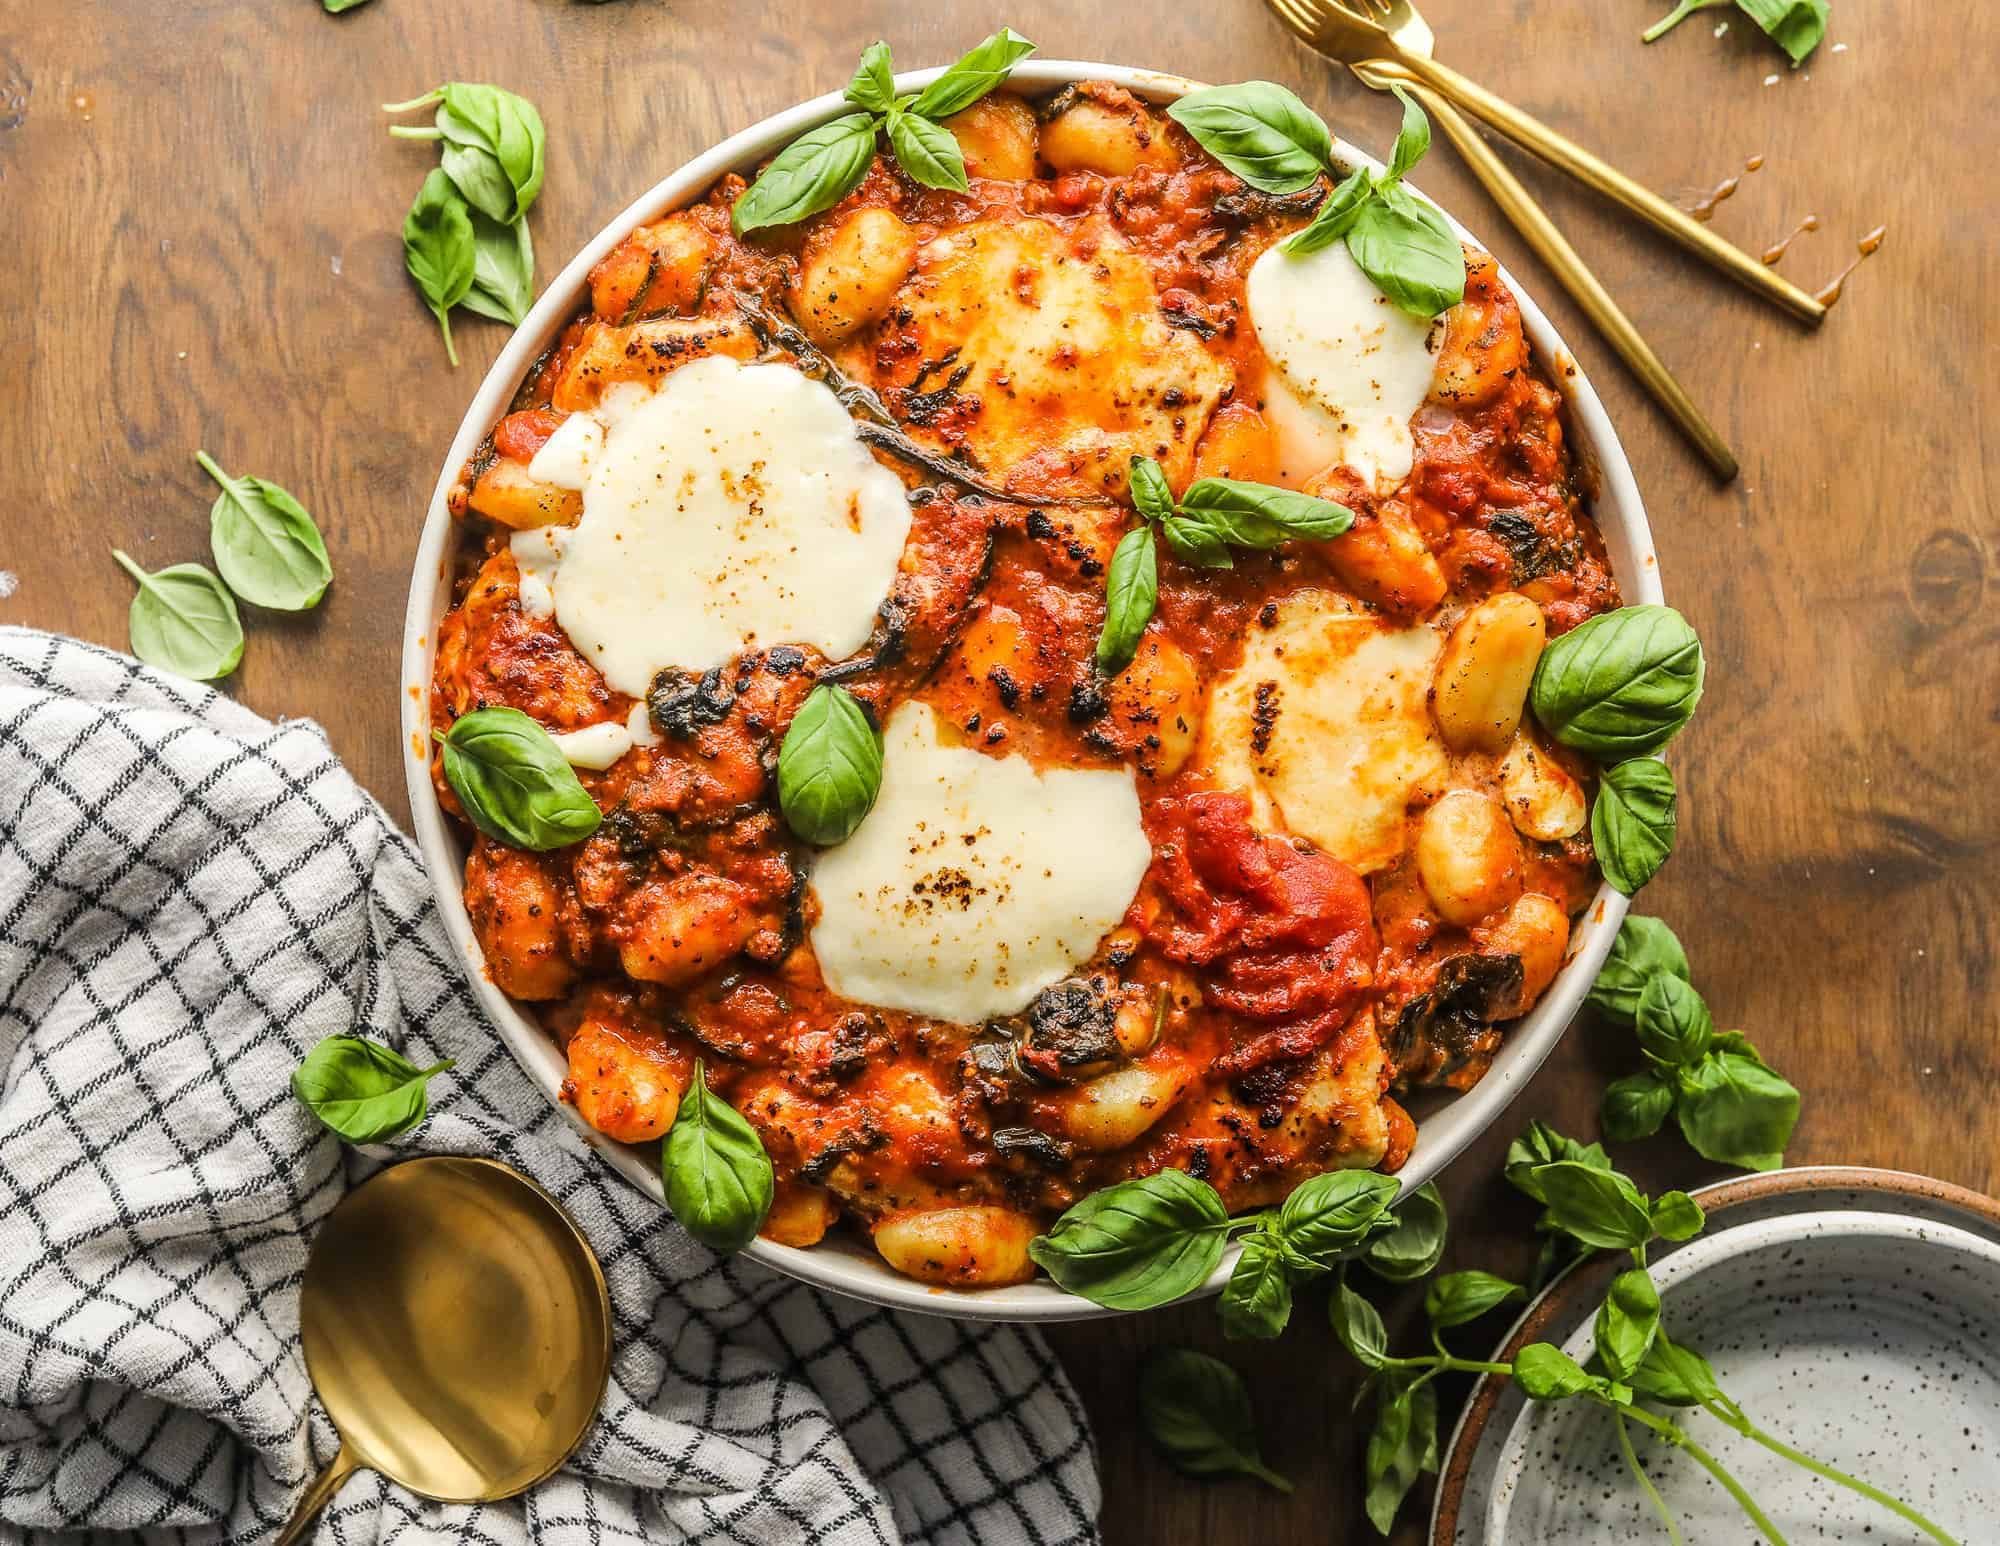 Sausage and Spinach Gnocchi Bake in a bowl garnished with basil